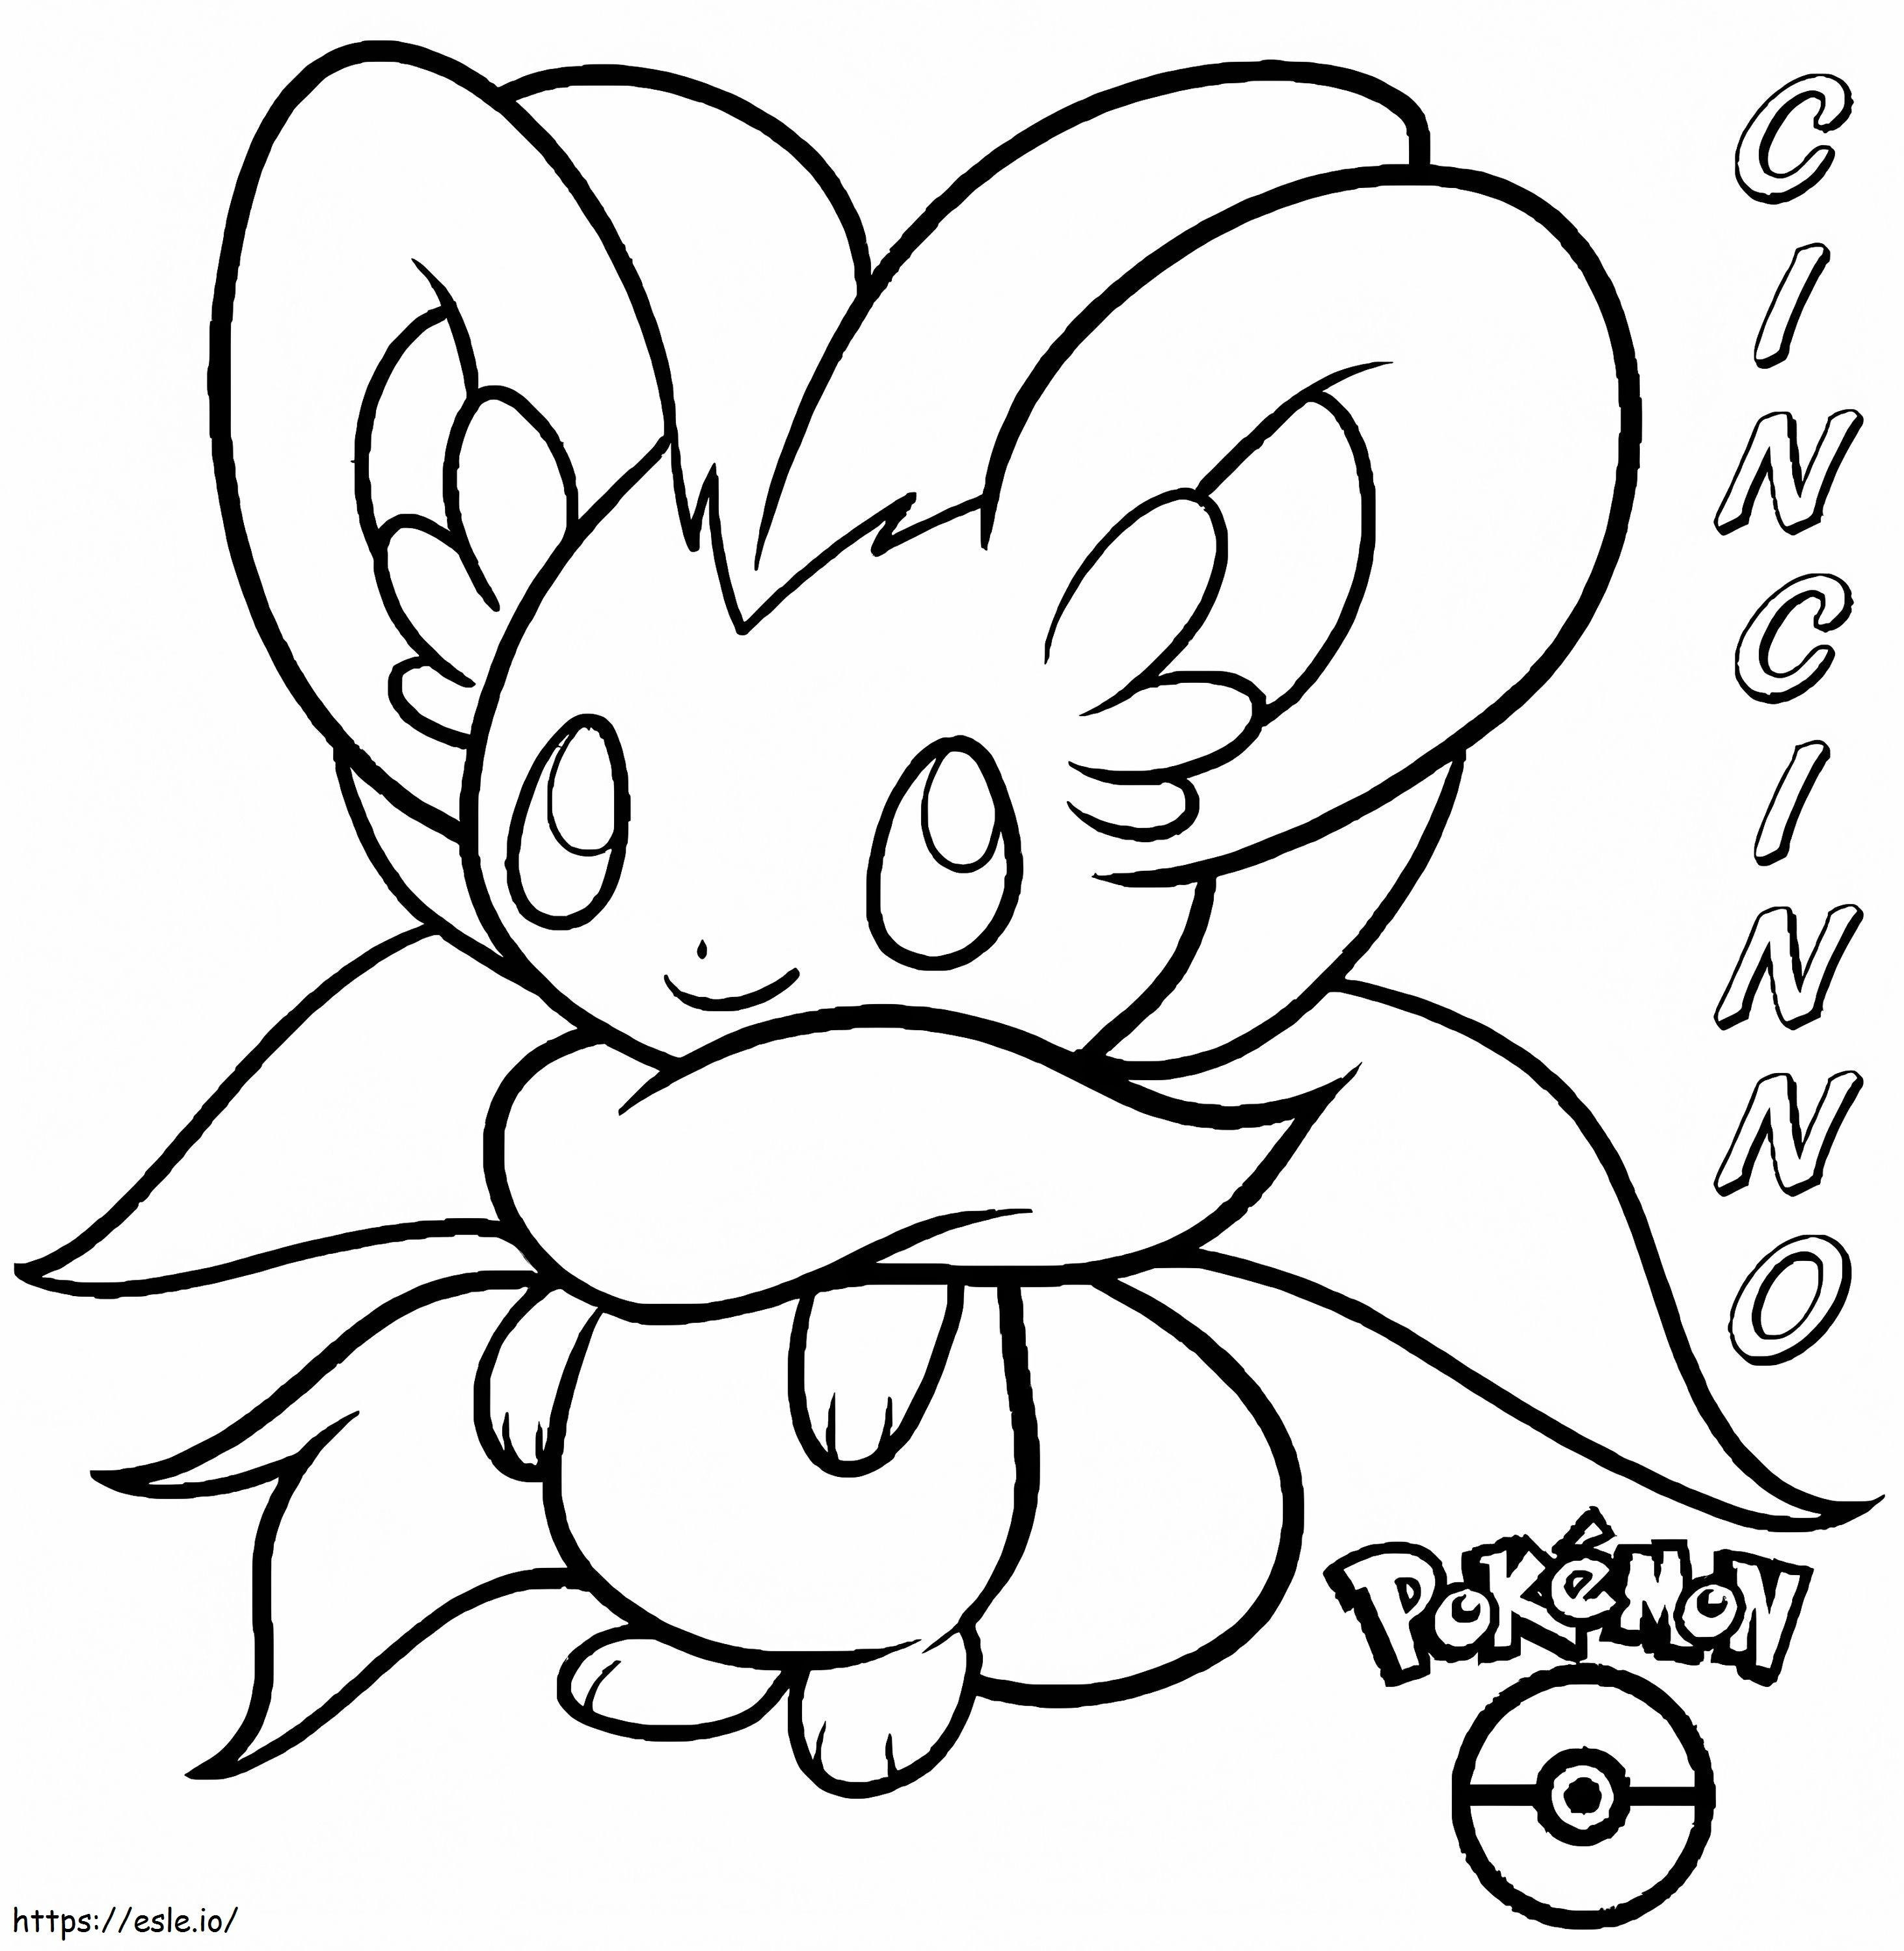 Lovely Cinccino coloring page